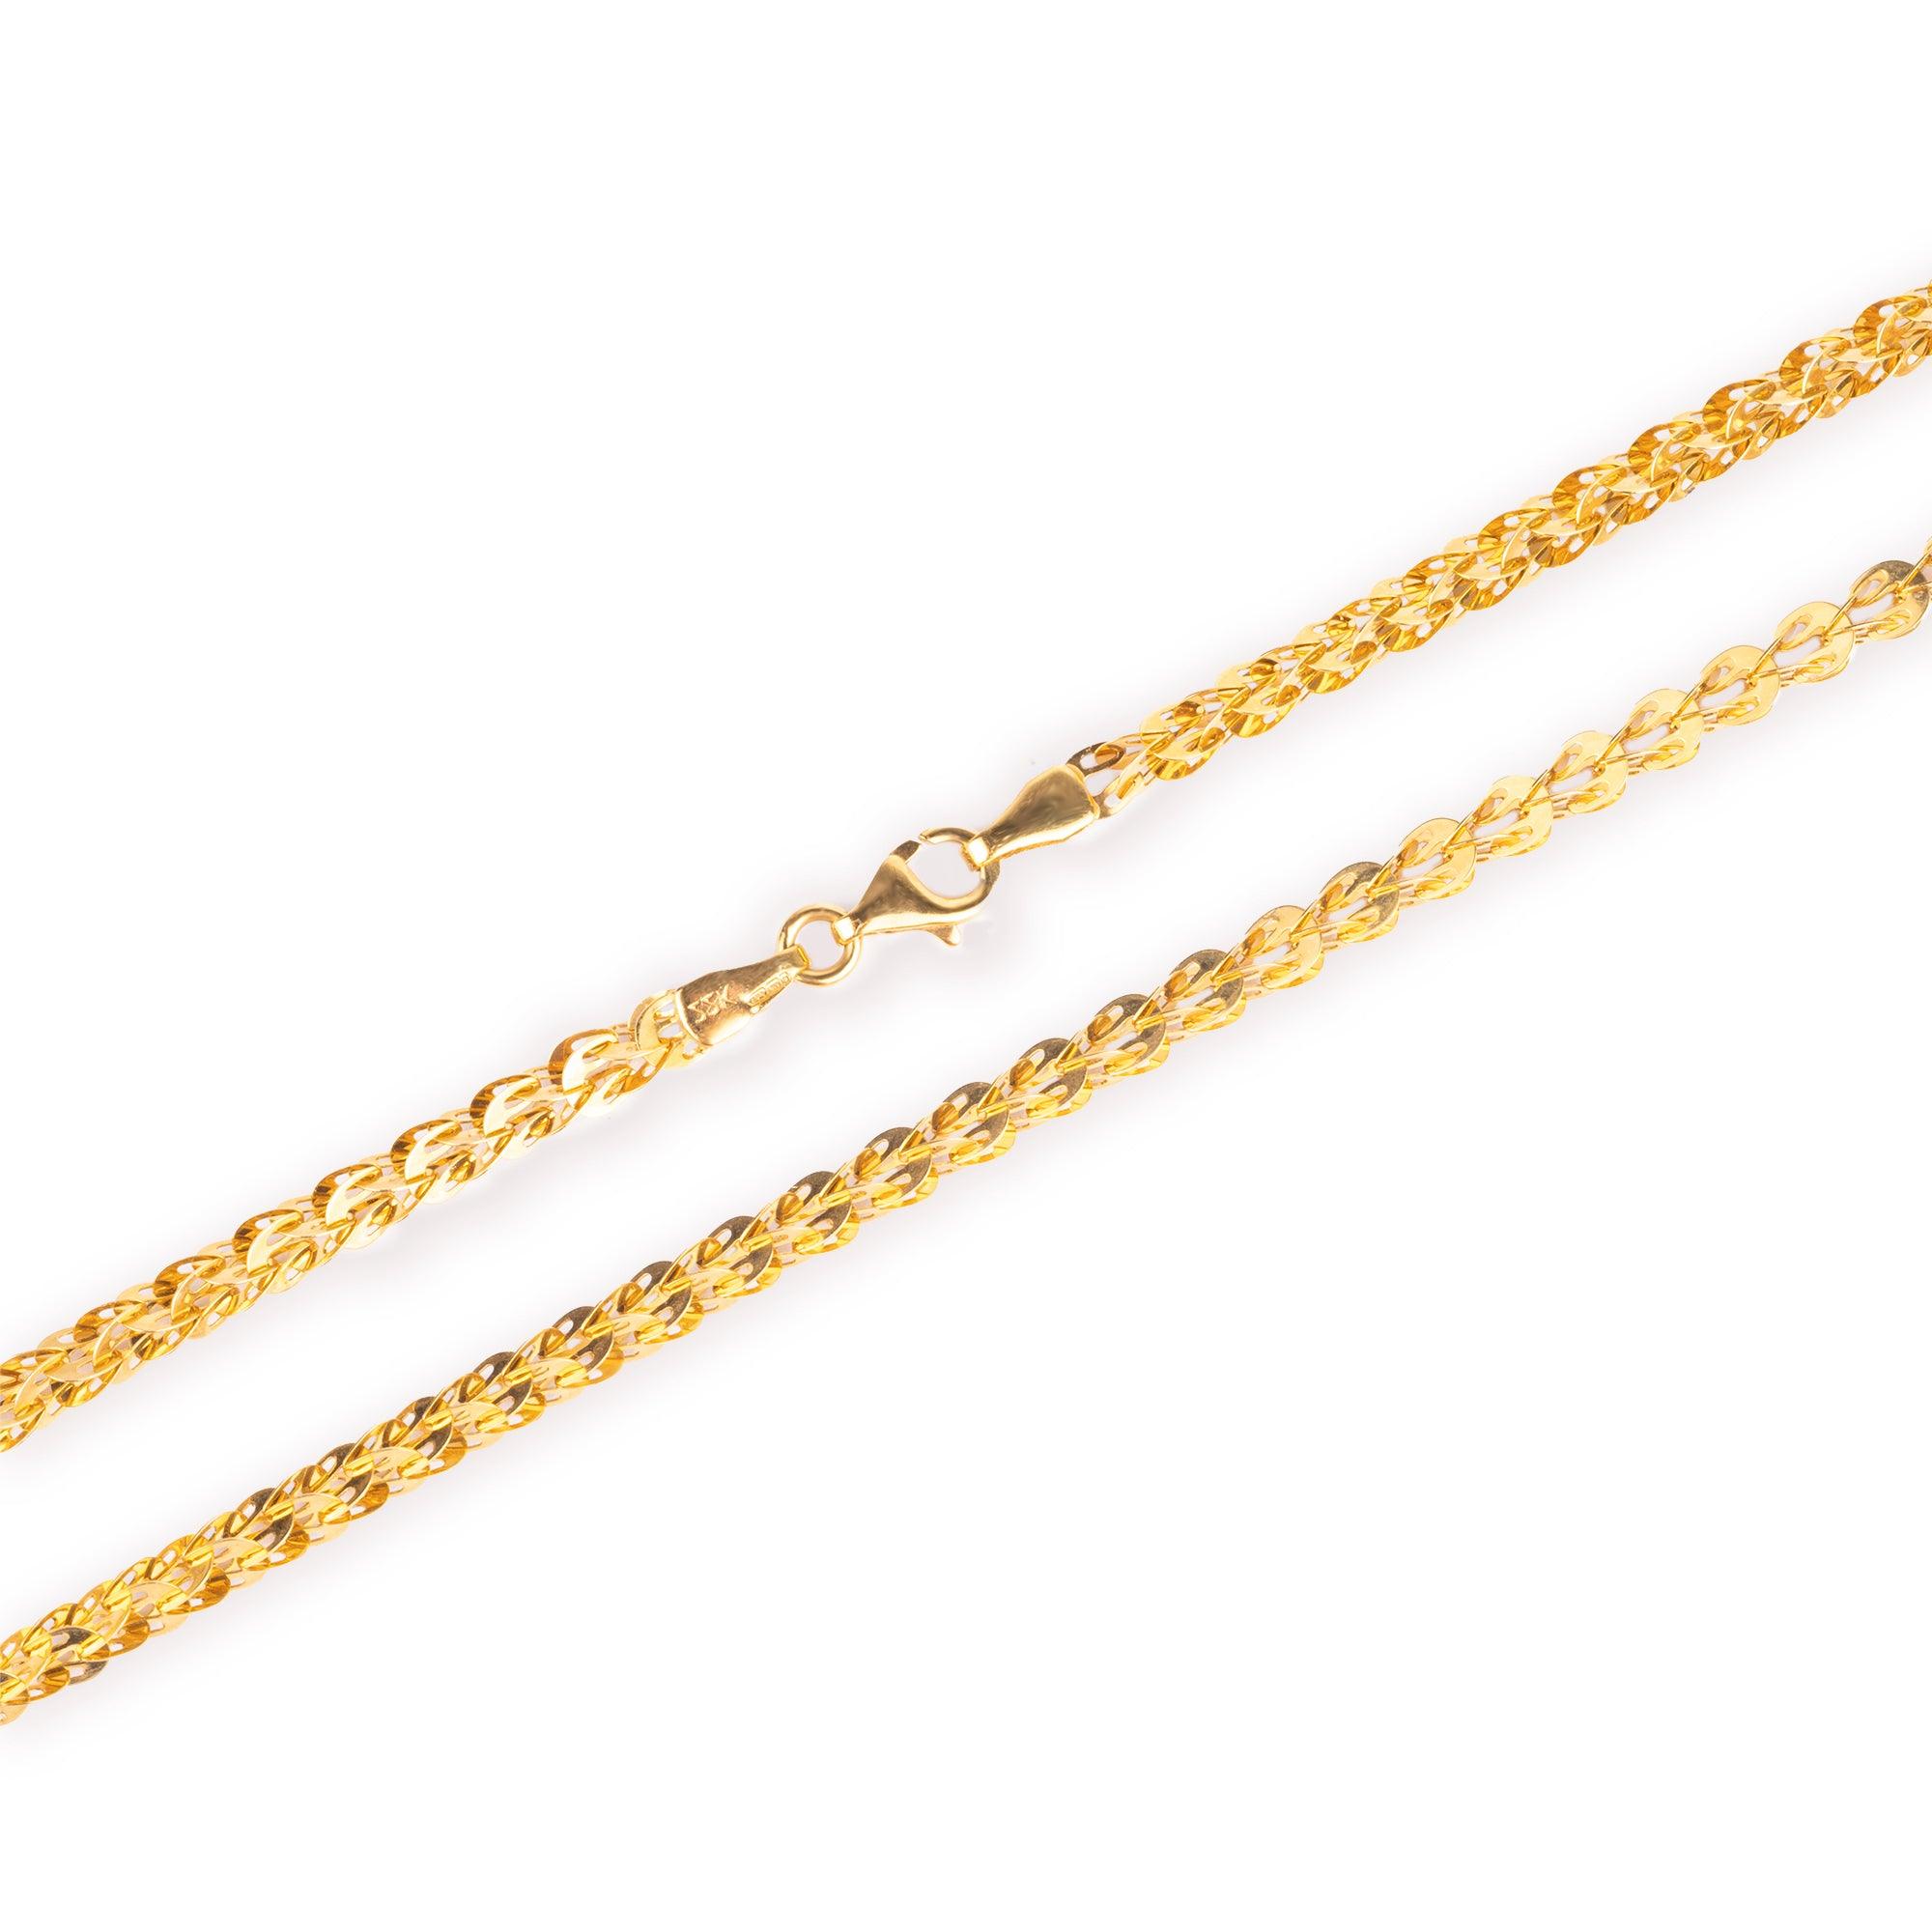 22ct Gold Dragon Scale Chain with Interwoven Links and Lobster Clasp (12g) C-8201 - Minar Jewellers